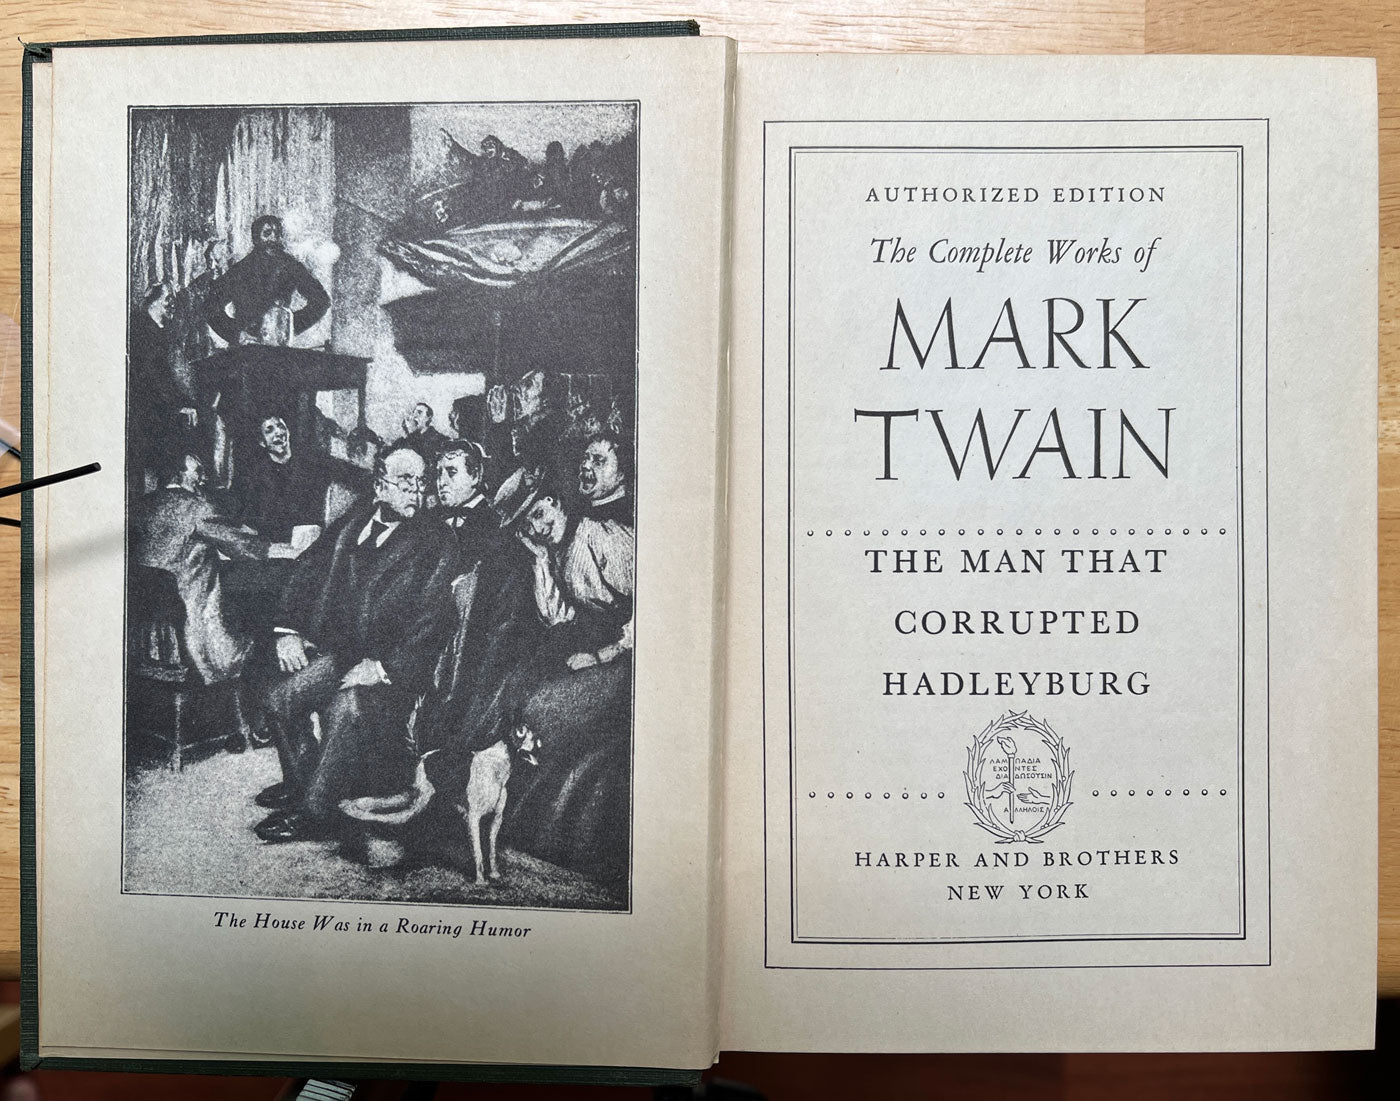 Mark Twain The Man That Corrupted Hadleyburg title page